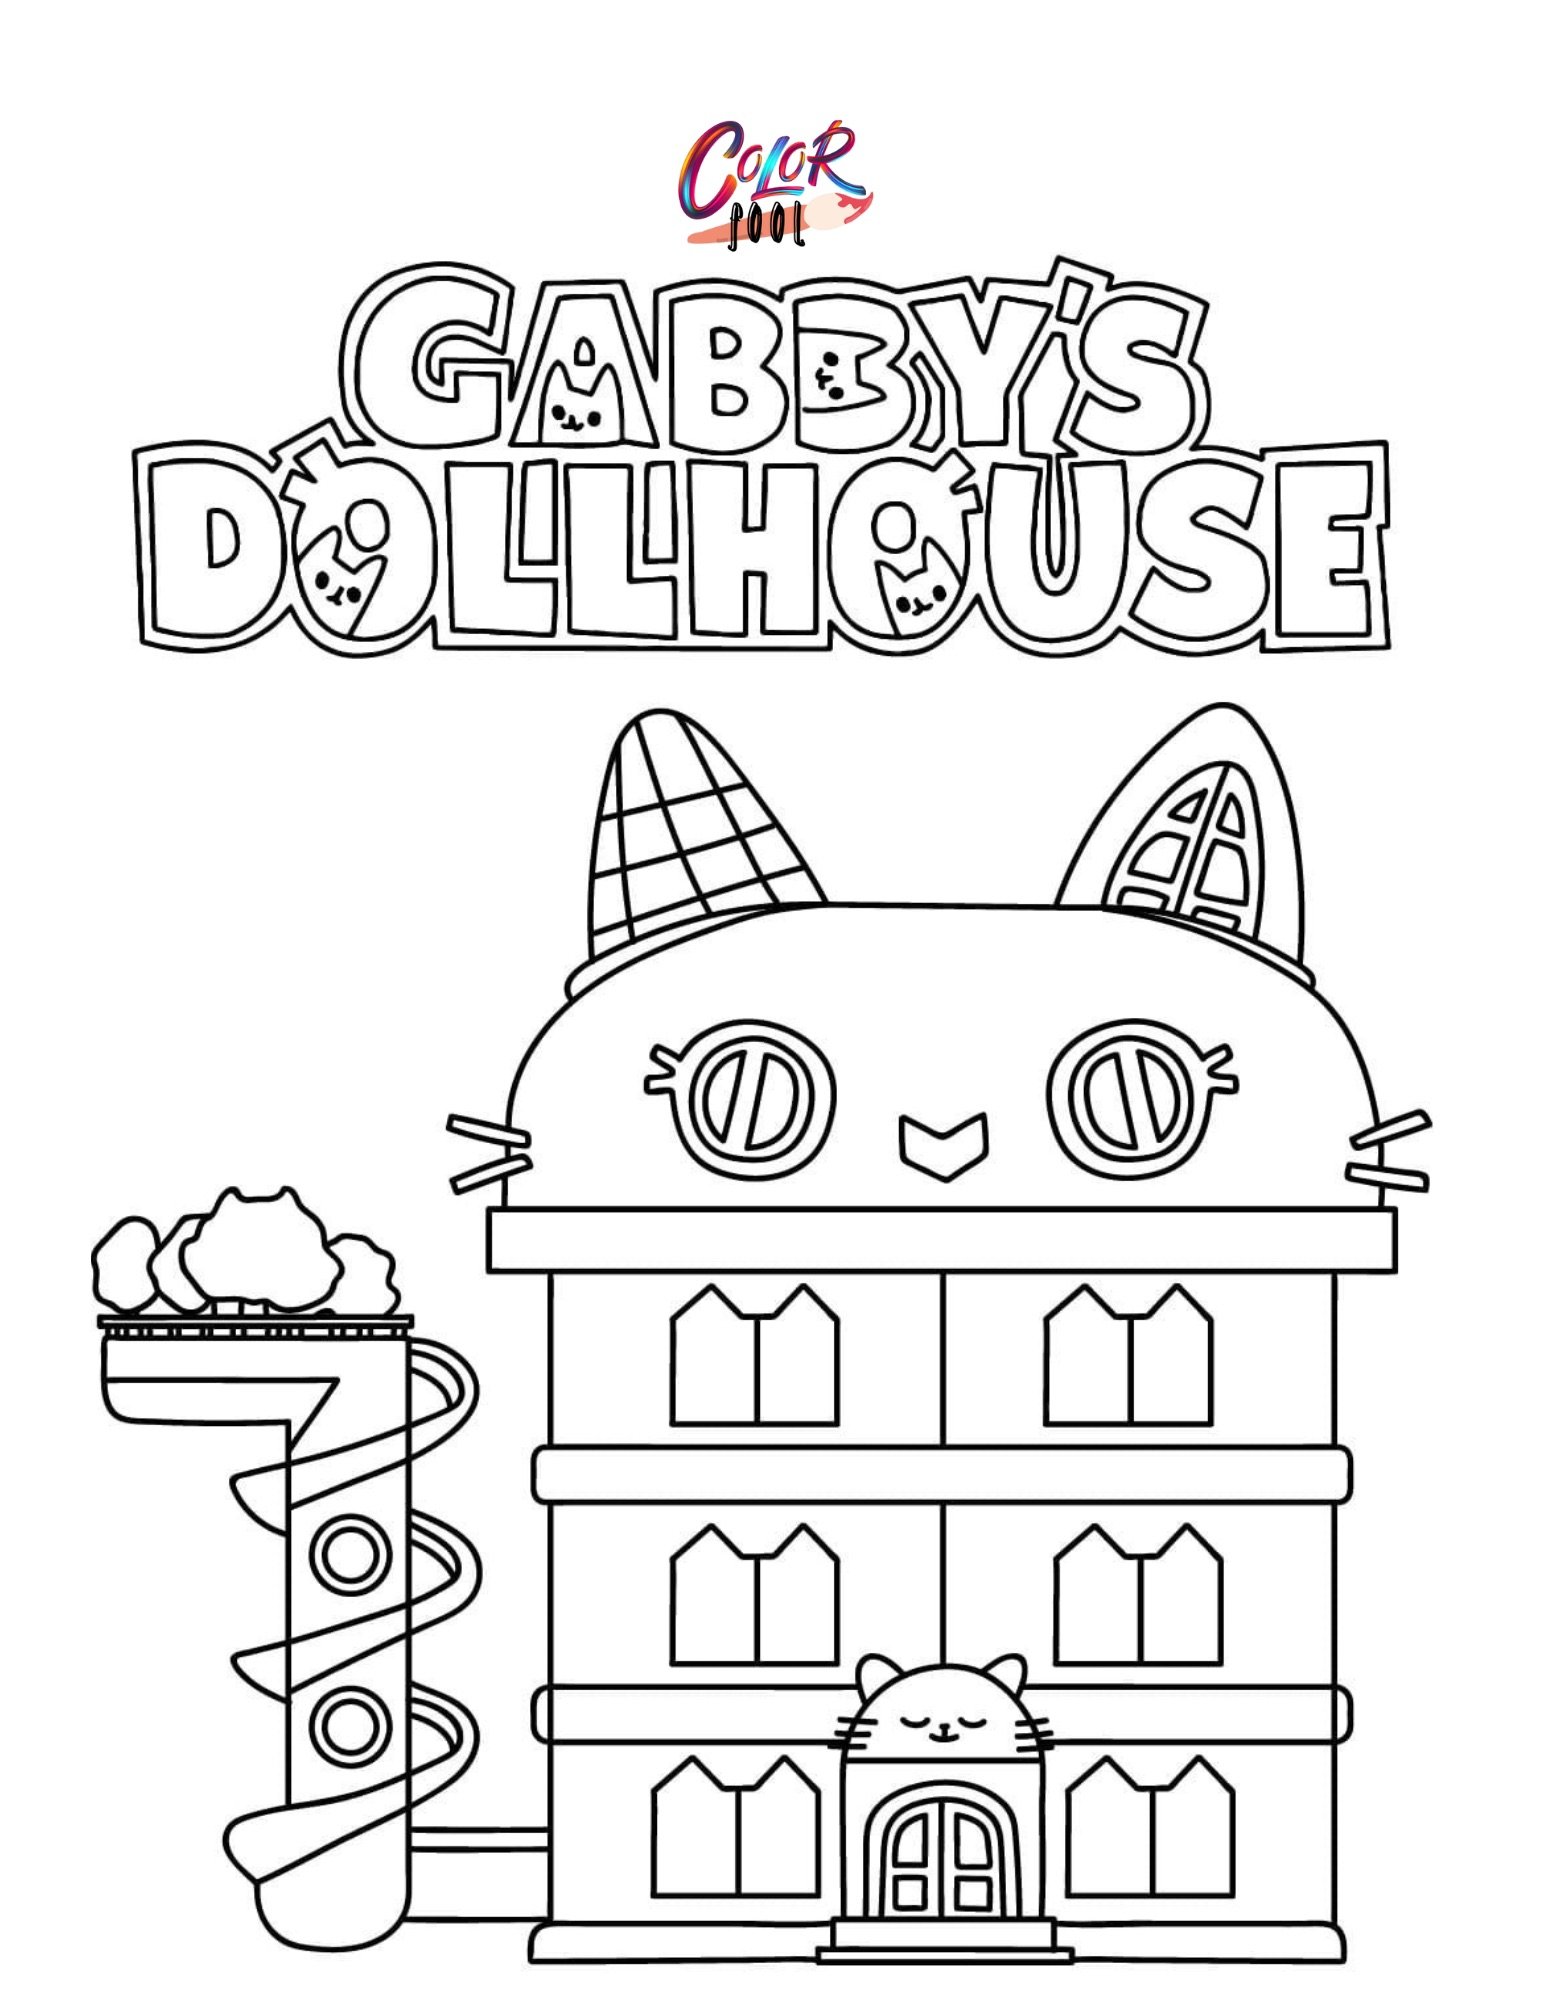 gabby dollhouse coloring page